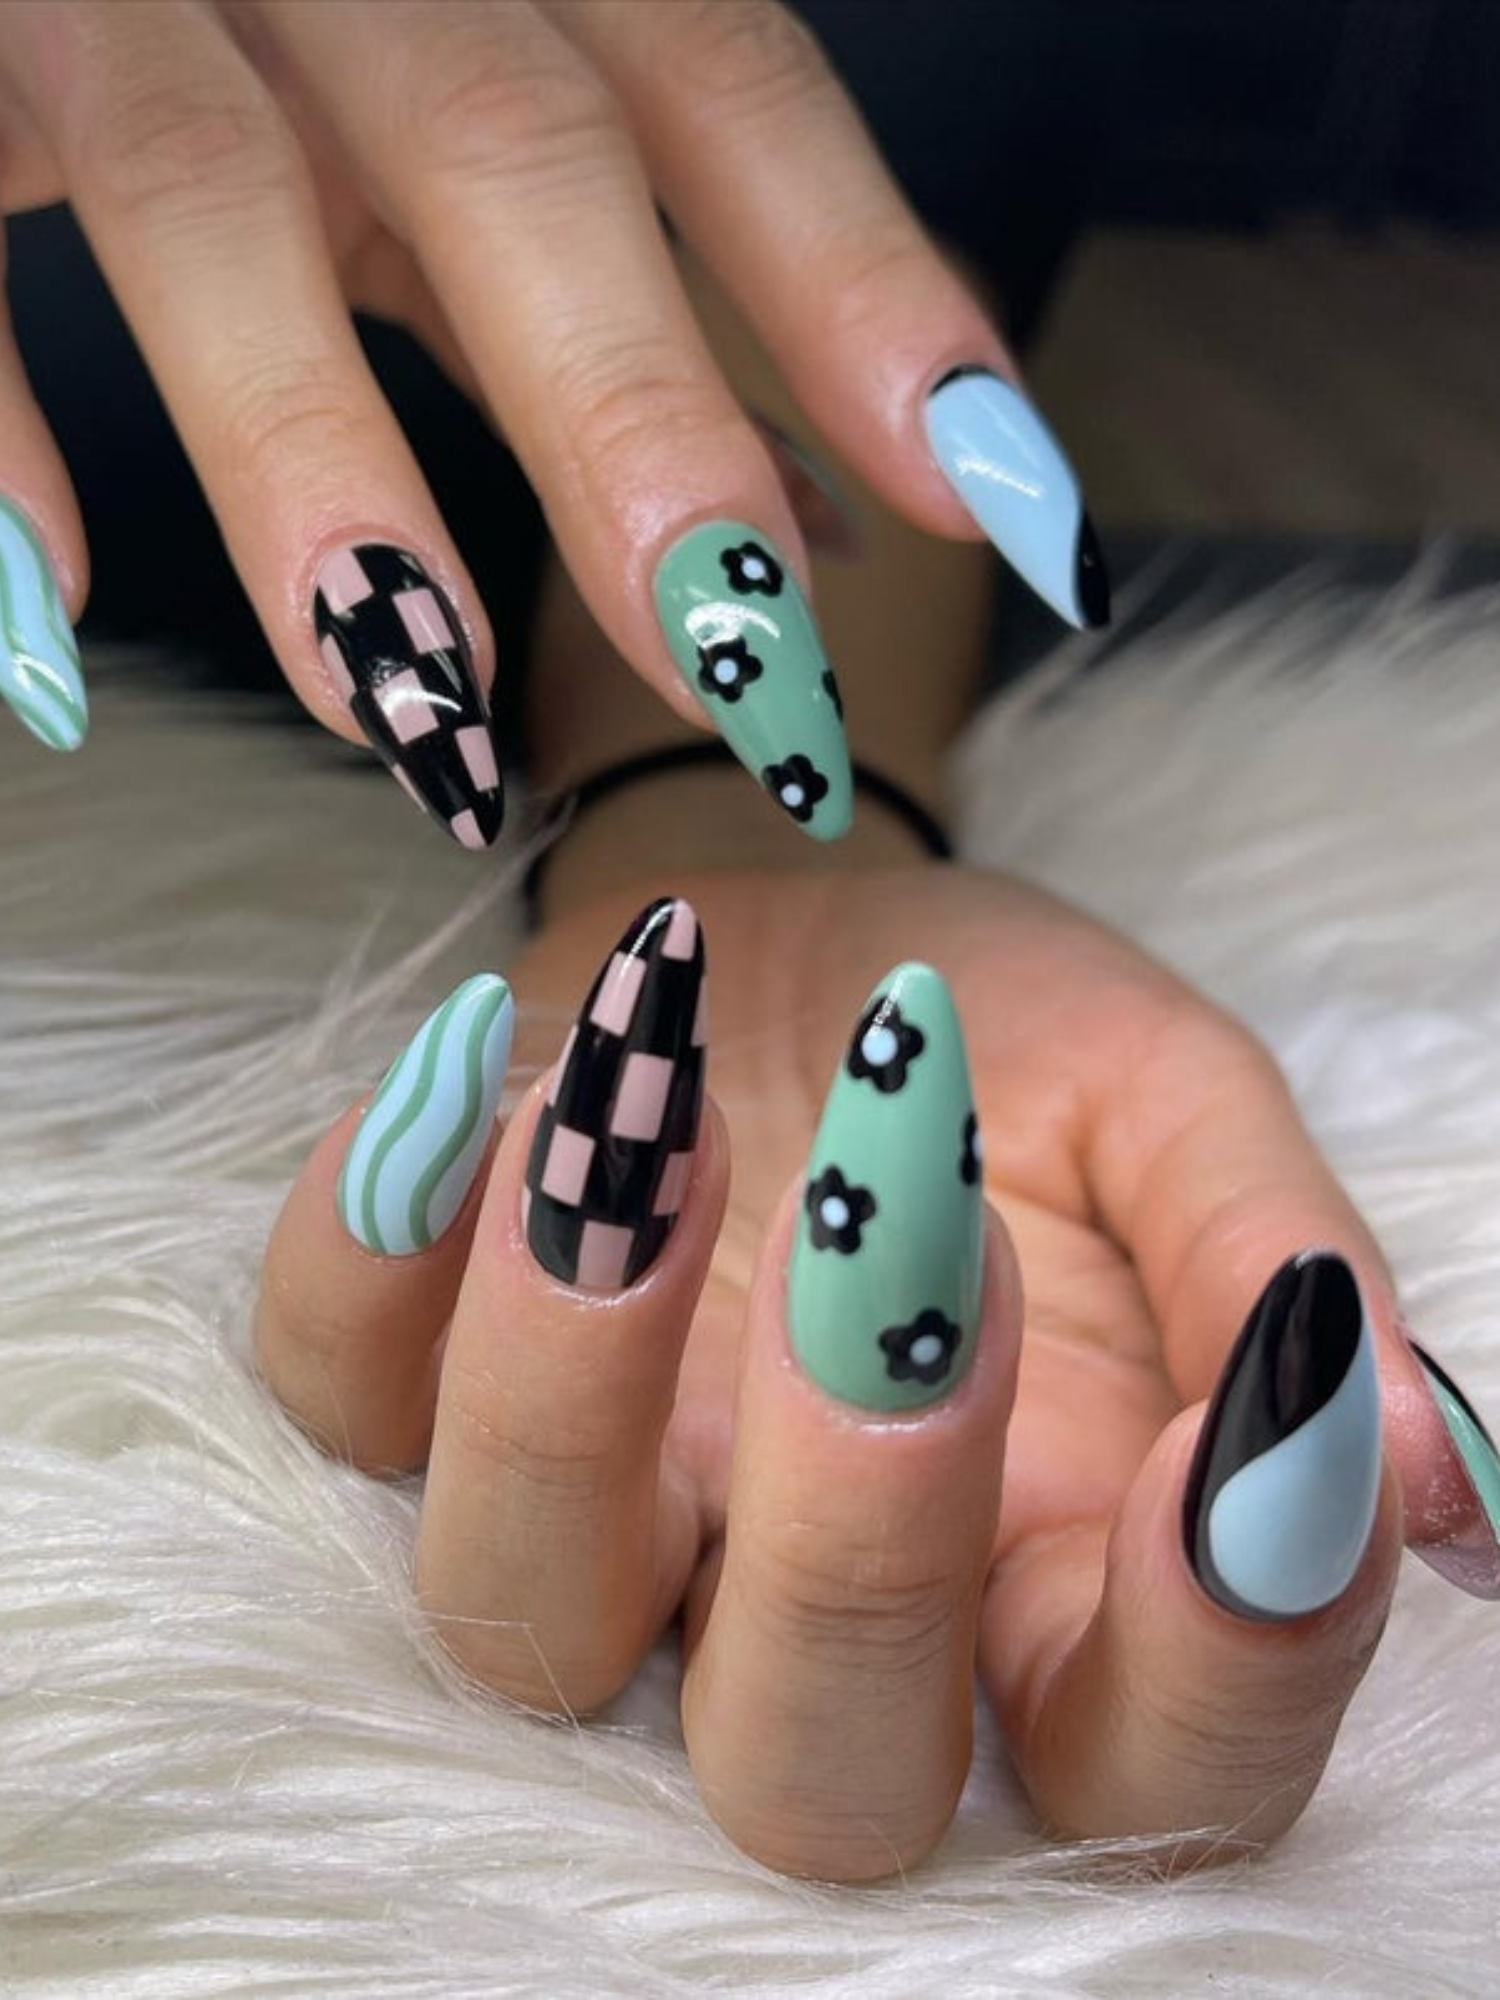 Perf for anyone who doesnt like spooky nails! 🎀🖤 products used are o, gel x nails